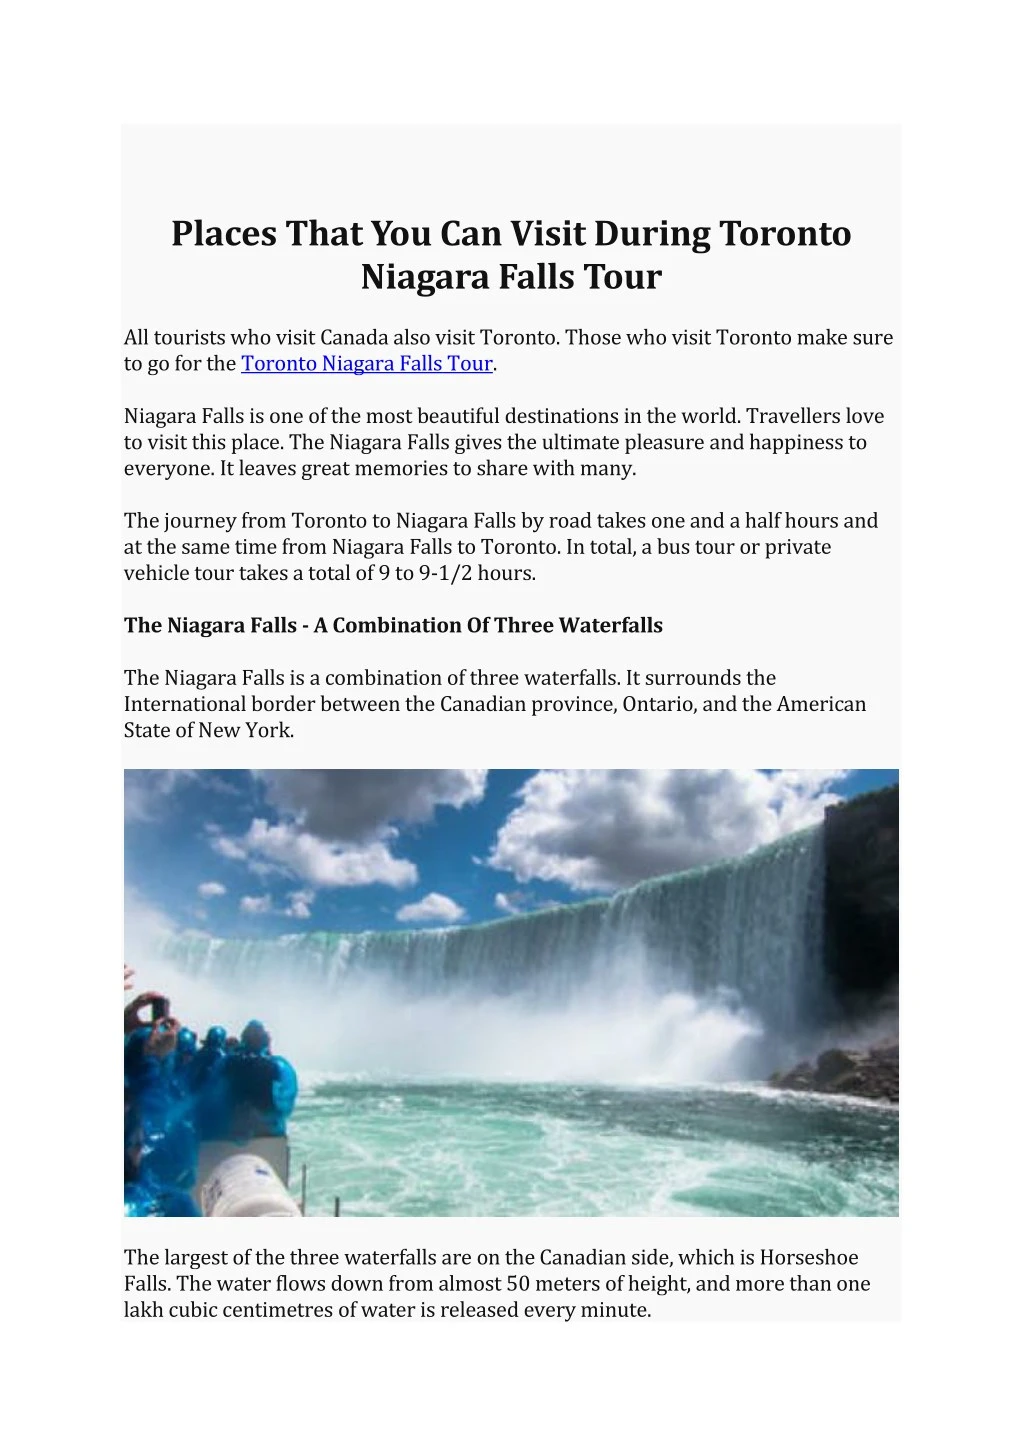 places that you can visit during toronto niagara